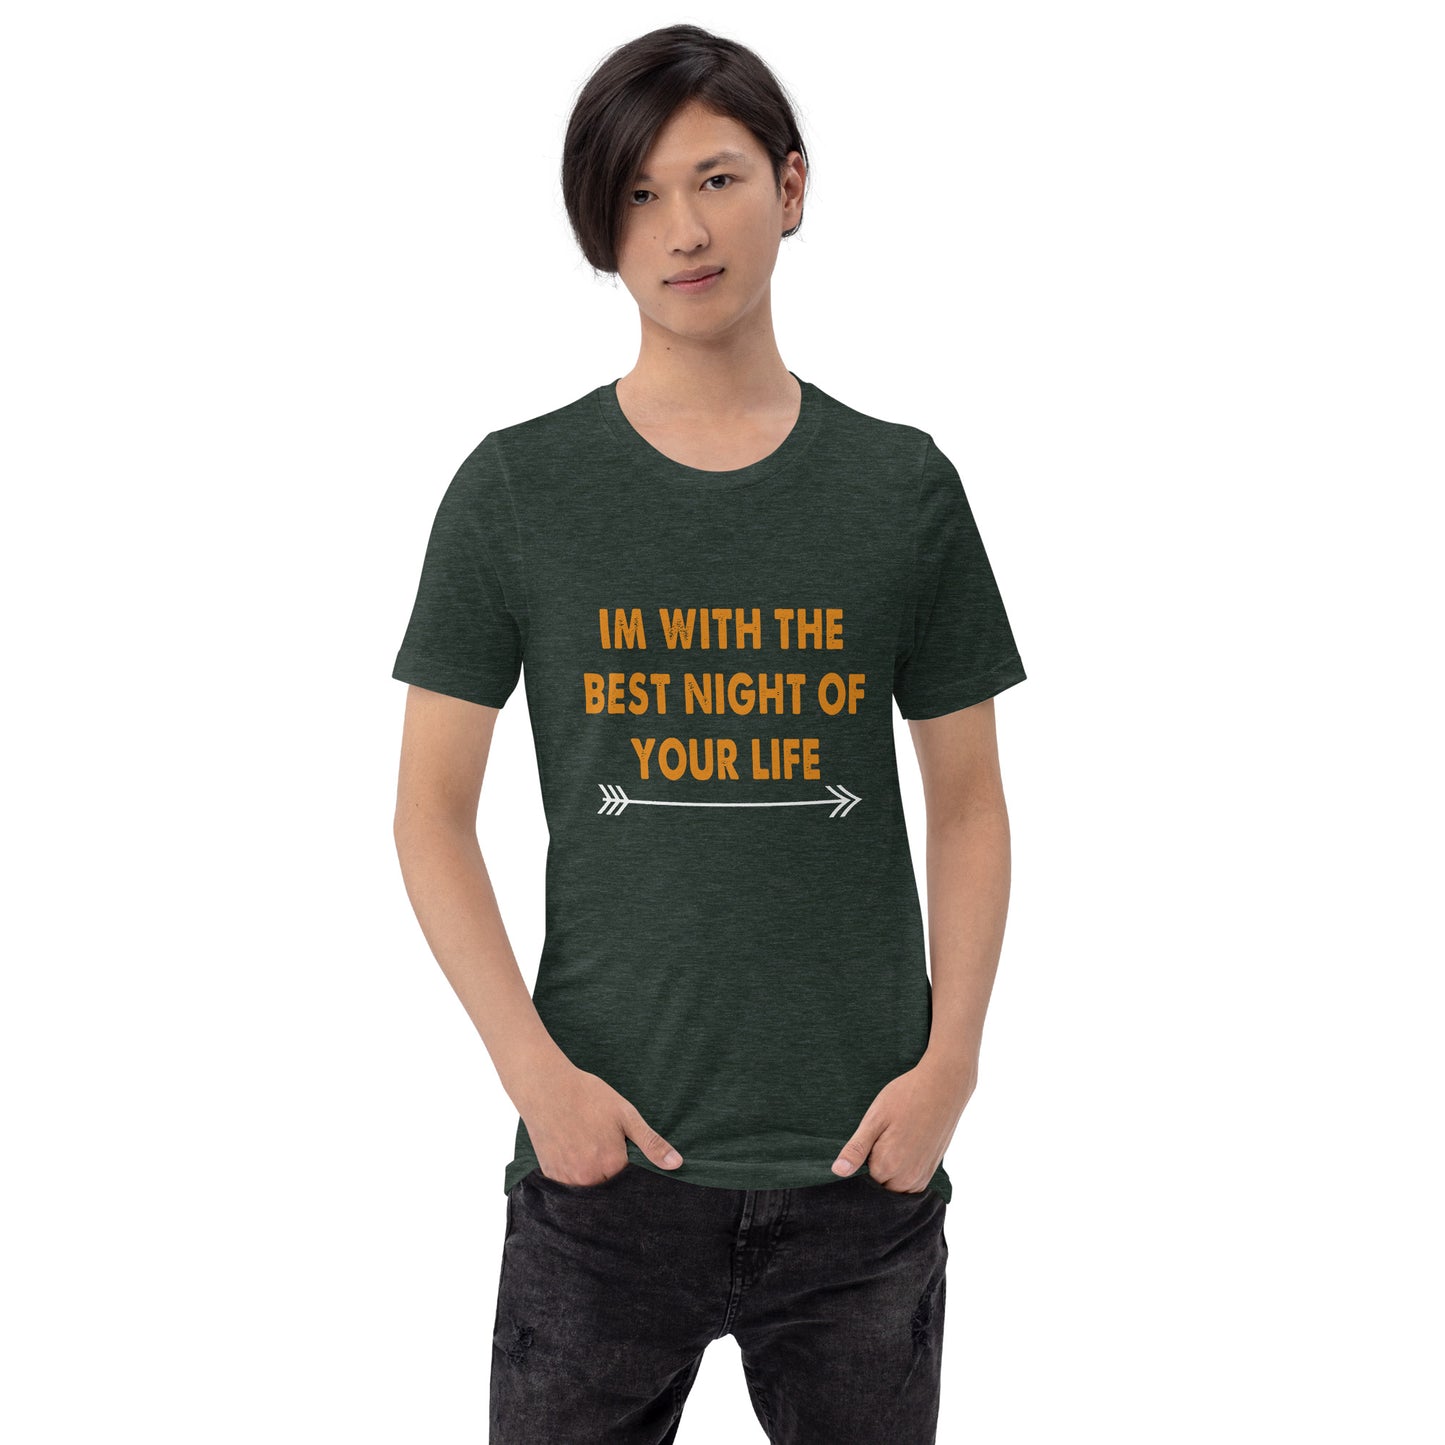 I am with the best night of your life Unisex t-shirt